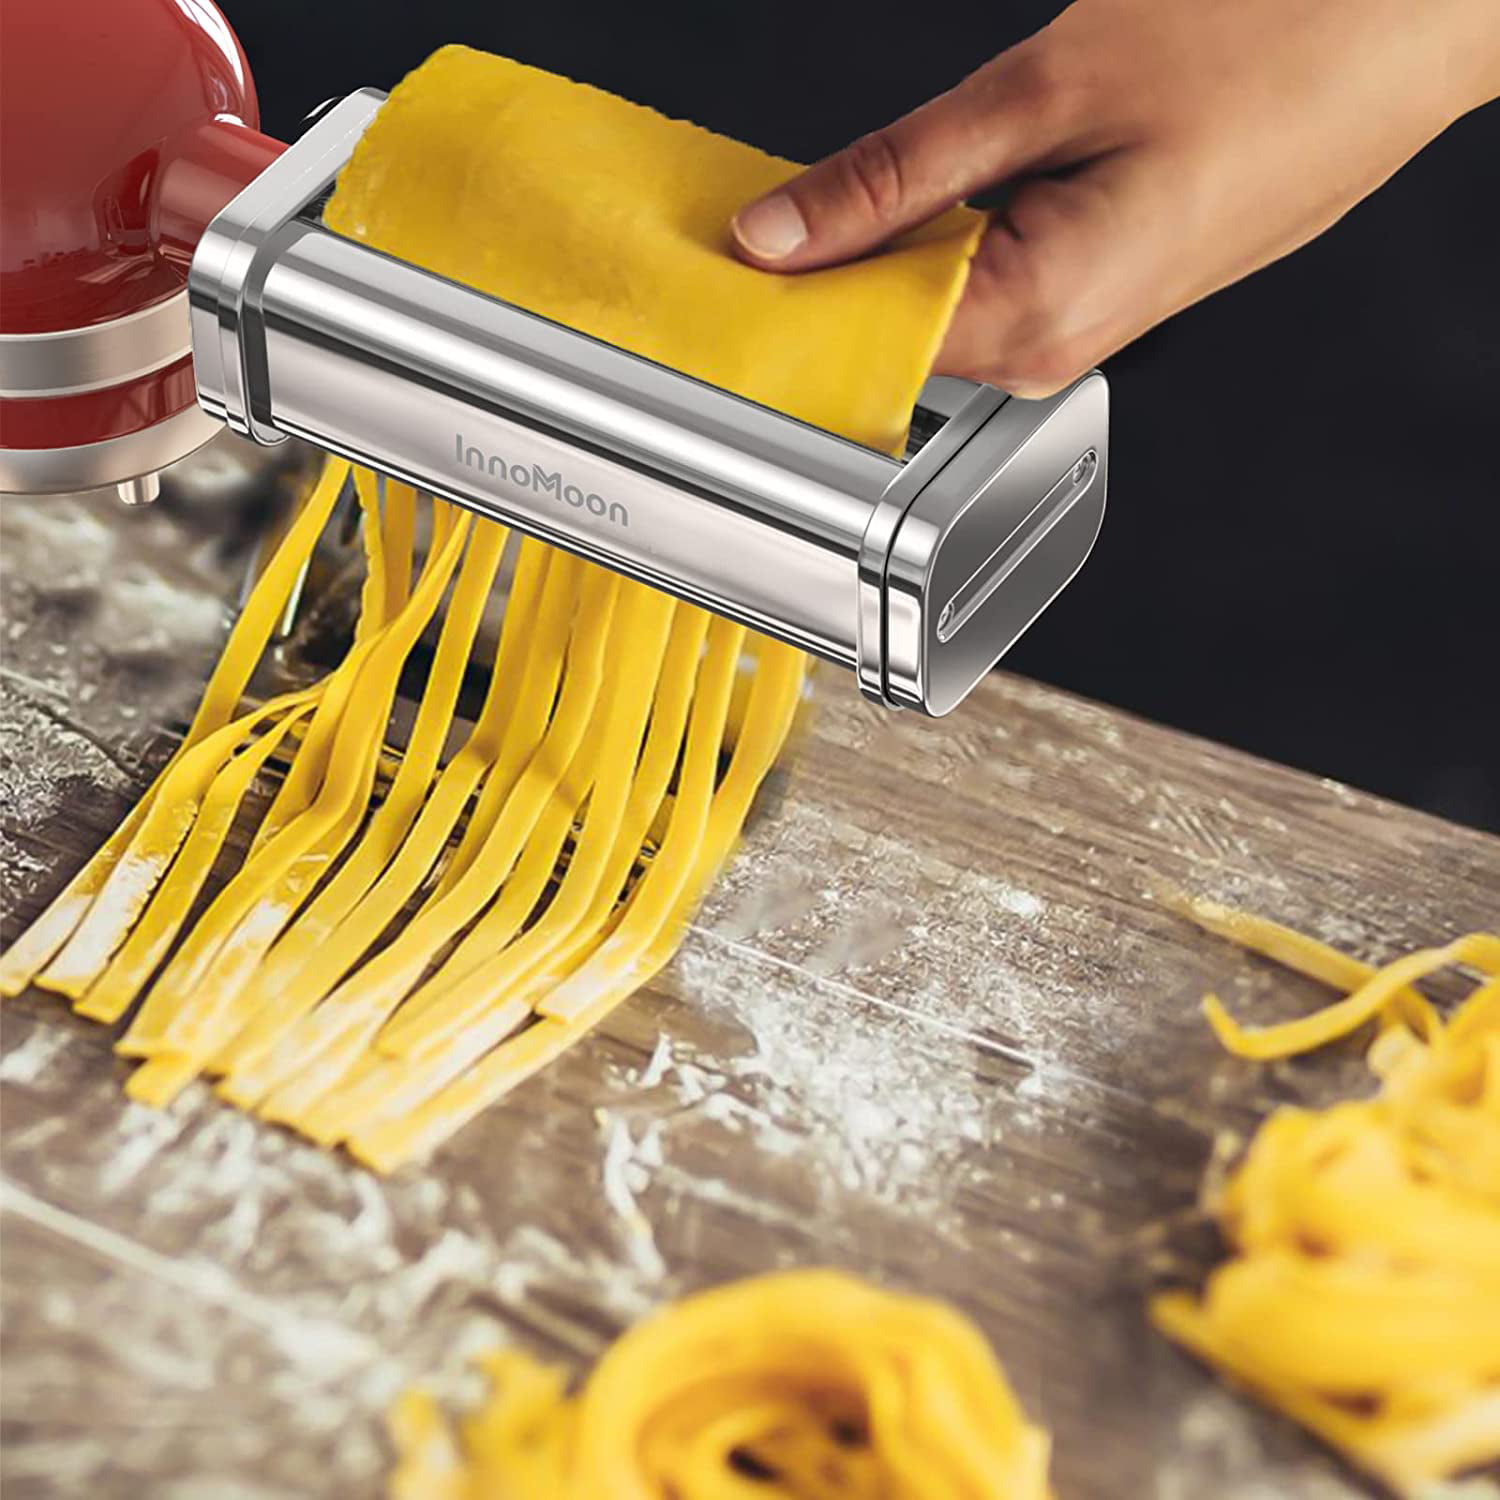 InnoMoon 3-Piece Pasta Roller & Cutters Attachments Set for KitchenAid  Stand Mixers, included Pasta Sheet Roller,Spaghetti & Fettuccine Cutter Maker  Accessories 